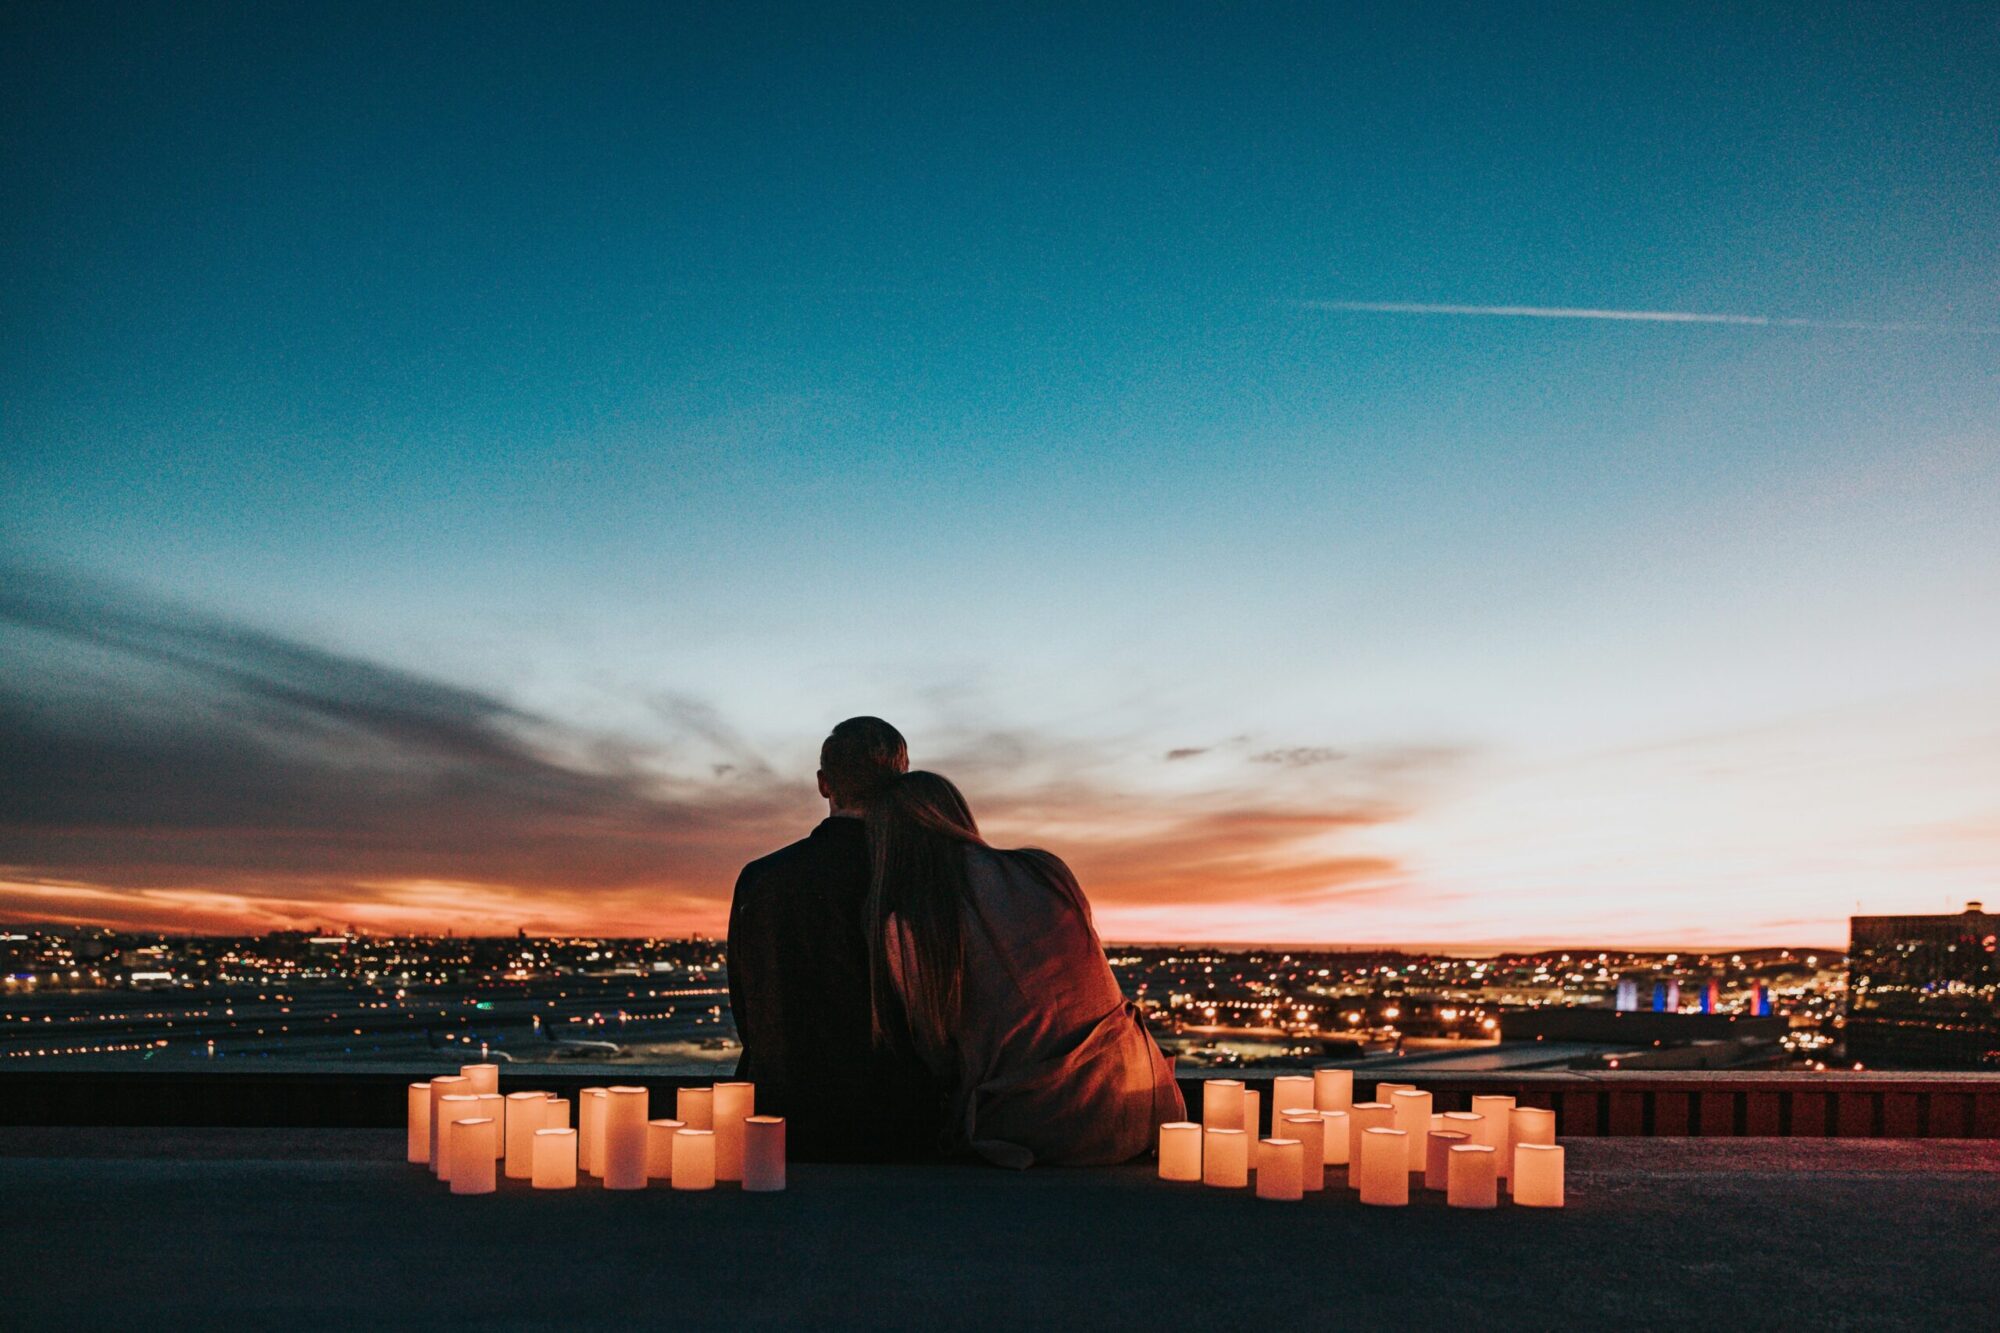 The Most Instagrammable Destinations for Romantic Travel